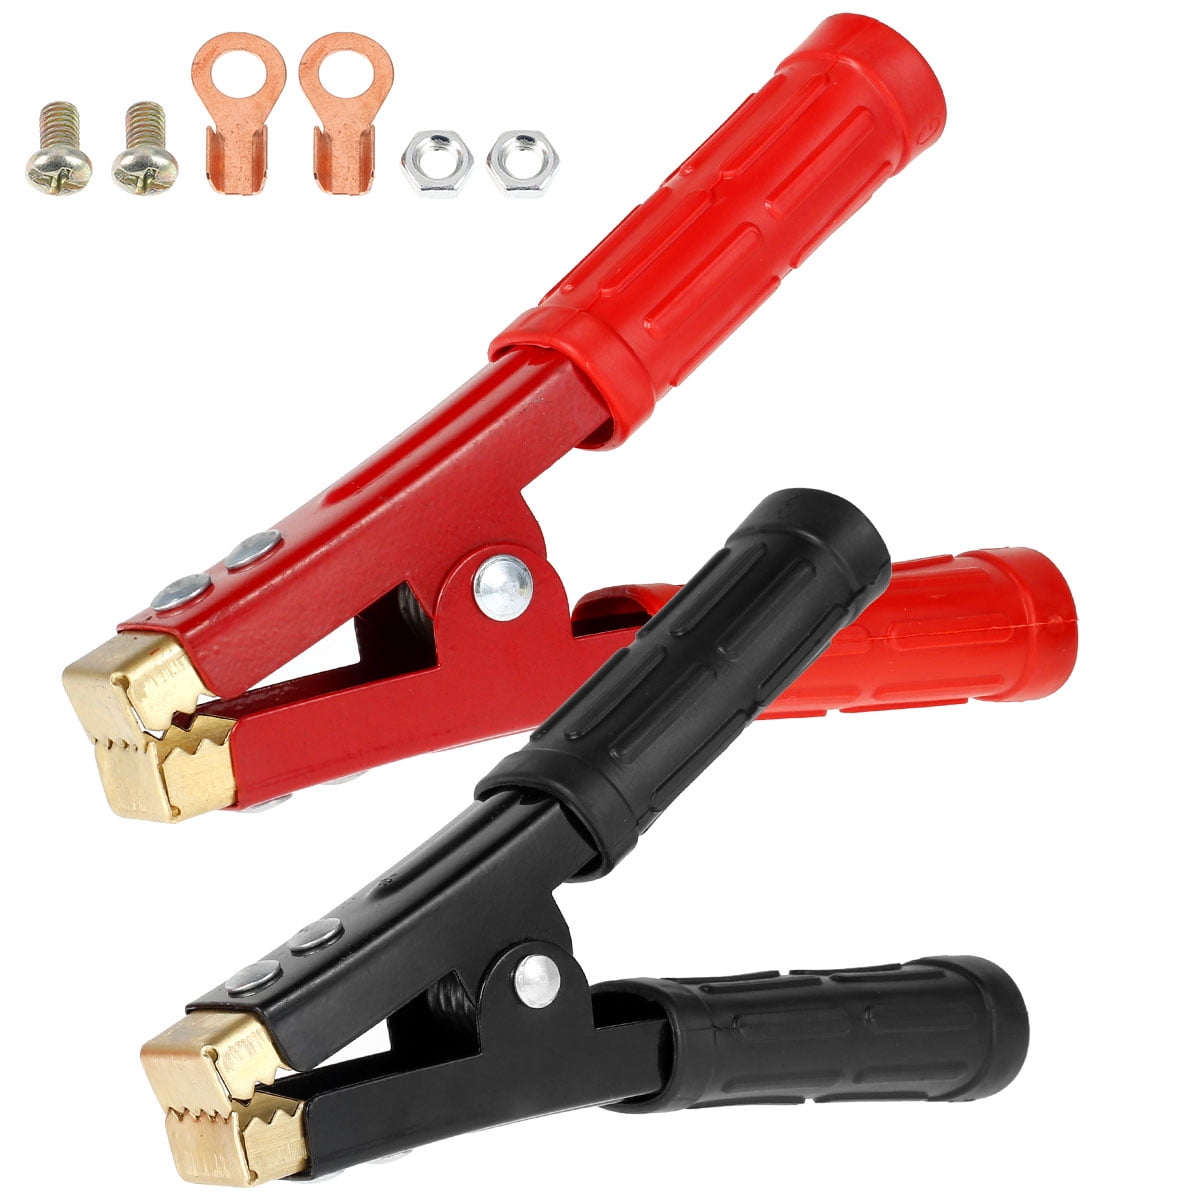 2 X Vehicle Battery Test Alligator Crocodile Clips Clamp Red Black Testing~W4 